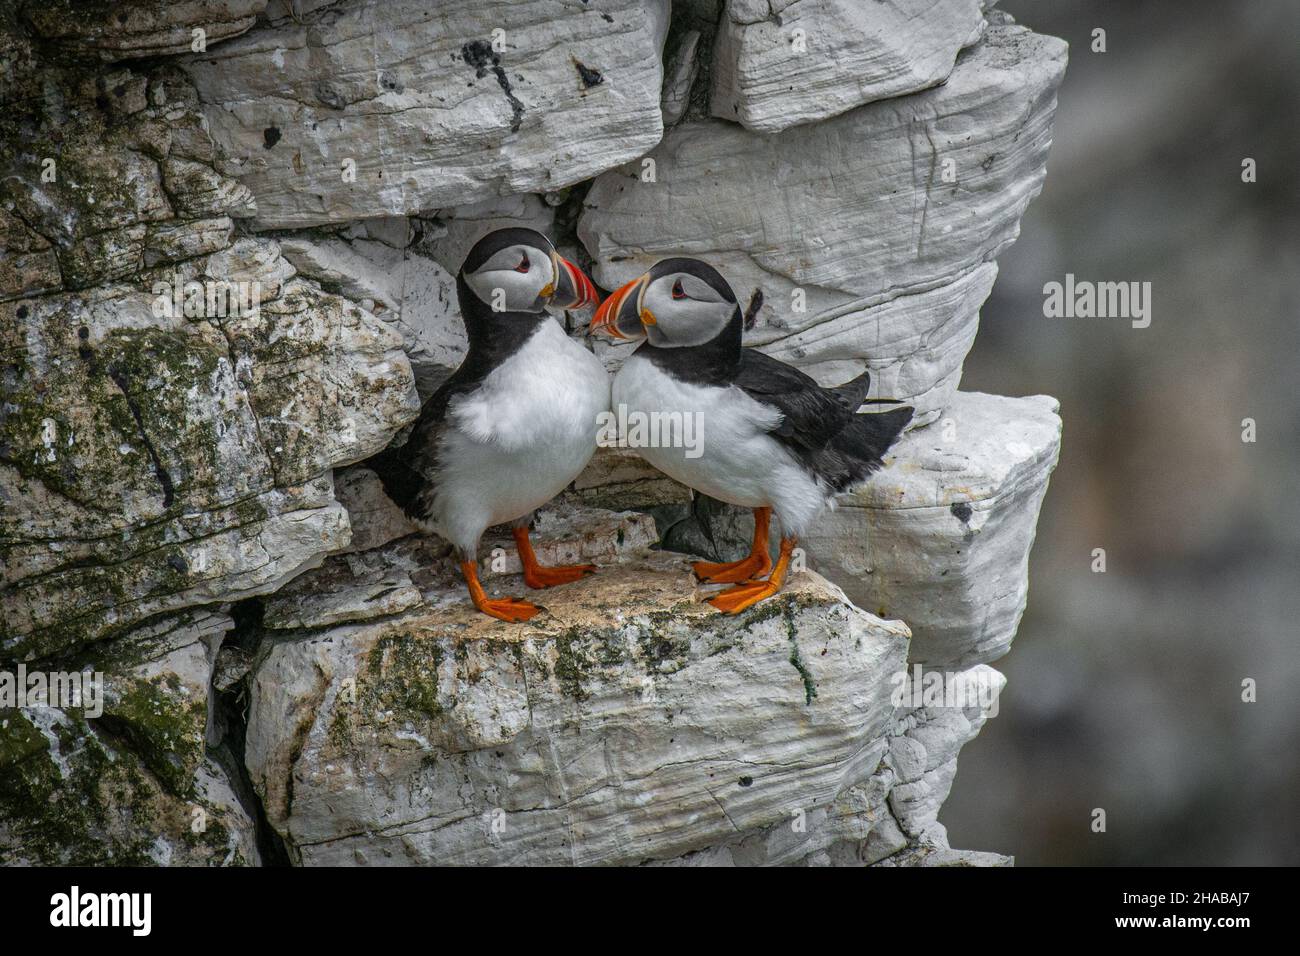 two puffins standing on a rocky outcrop of a cliff. they are facing each other Stock Photo